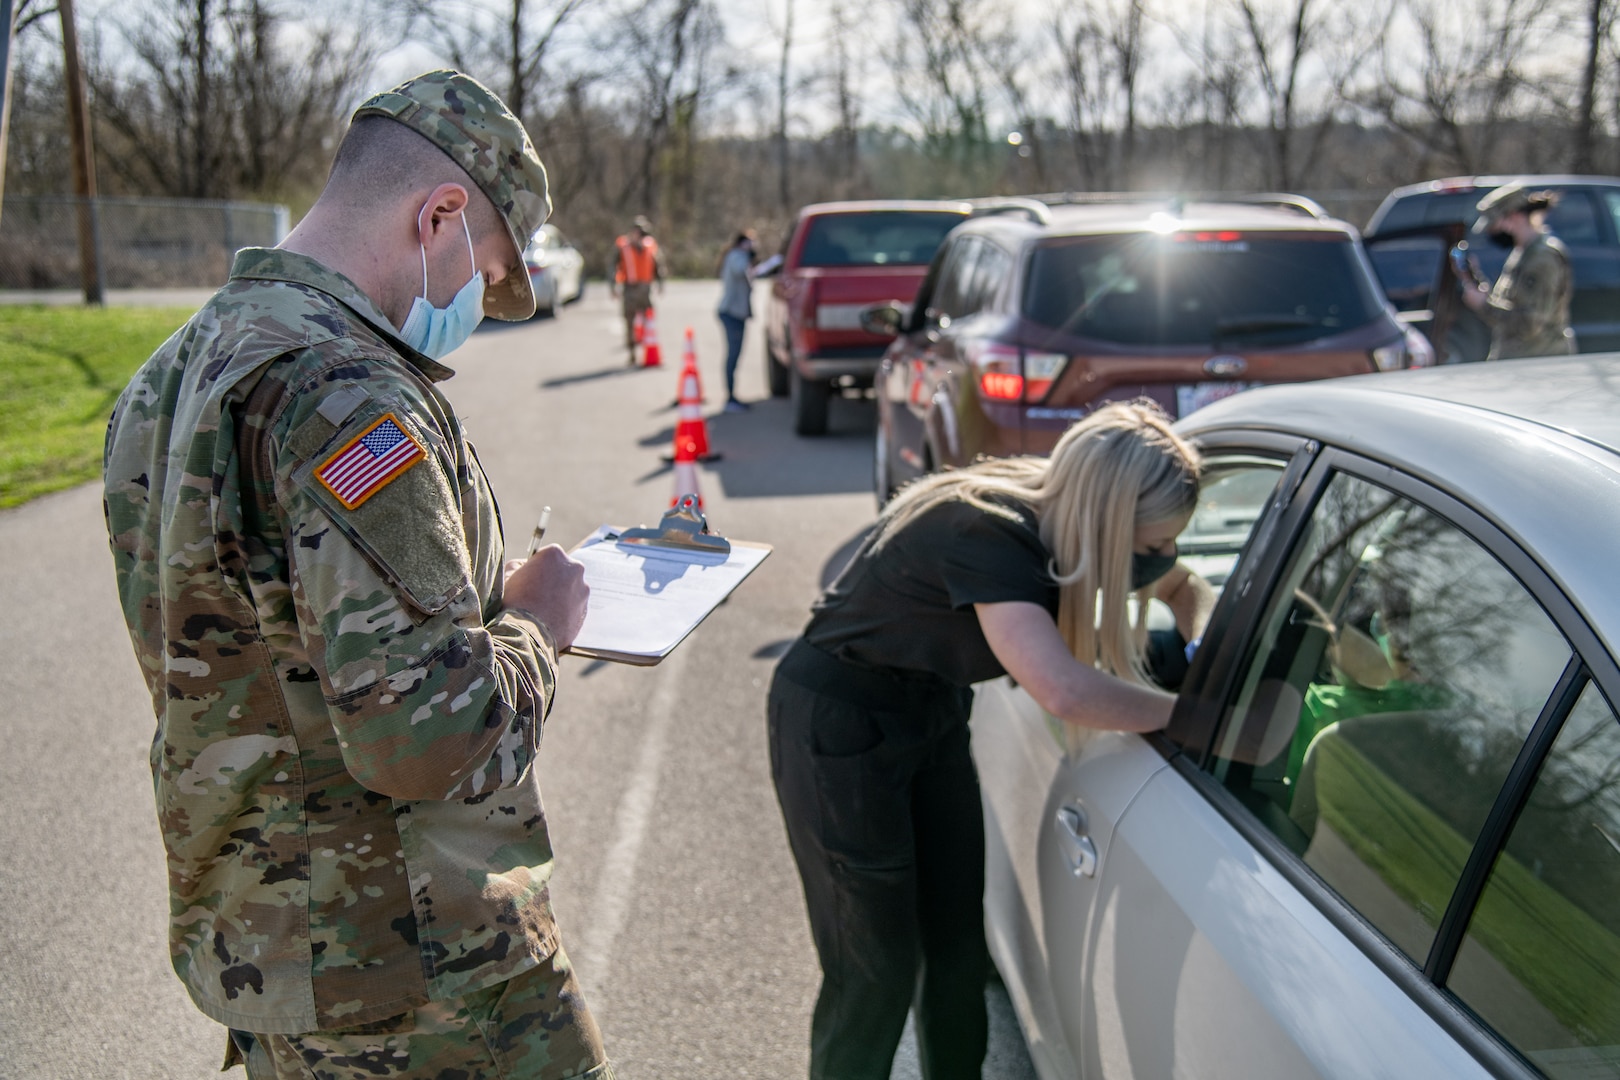 Members of the West Virginia National Guard conduct a mobile vaccination clinic for the Johnson & Johnson COVID-19 vaccine in Ft. Gay, West Virginia, Mar. 19, 2021. Members of the Guard partnered with members of the Wayne County Health Department, Marshall School of Pharmacy, and local law enforcement to administer more than 350 doses of the life-saving vaccines to rural residents of Wayne County. (U.S. Army National Guard photo by Edwin L. Wriston)